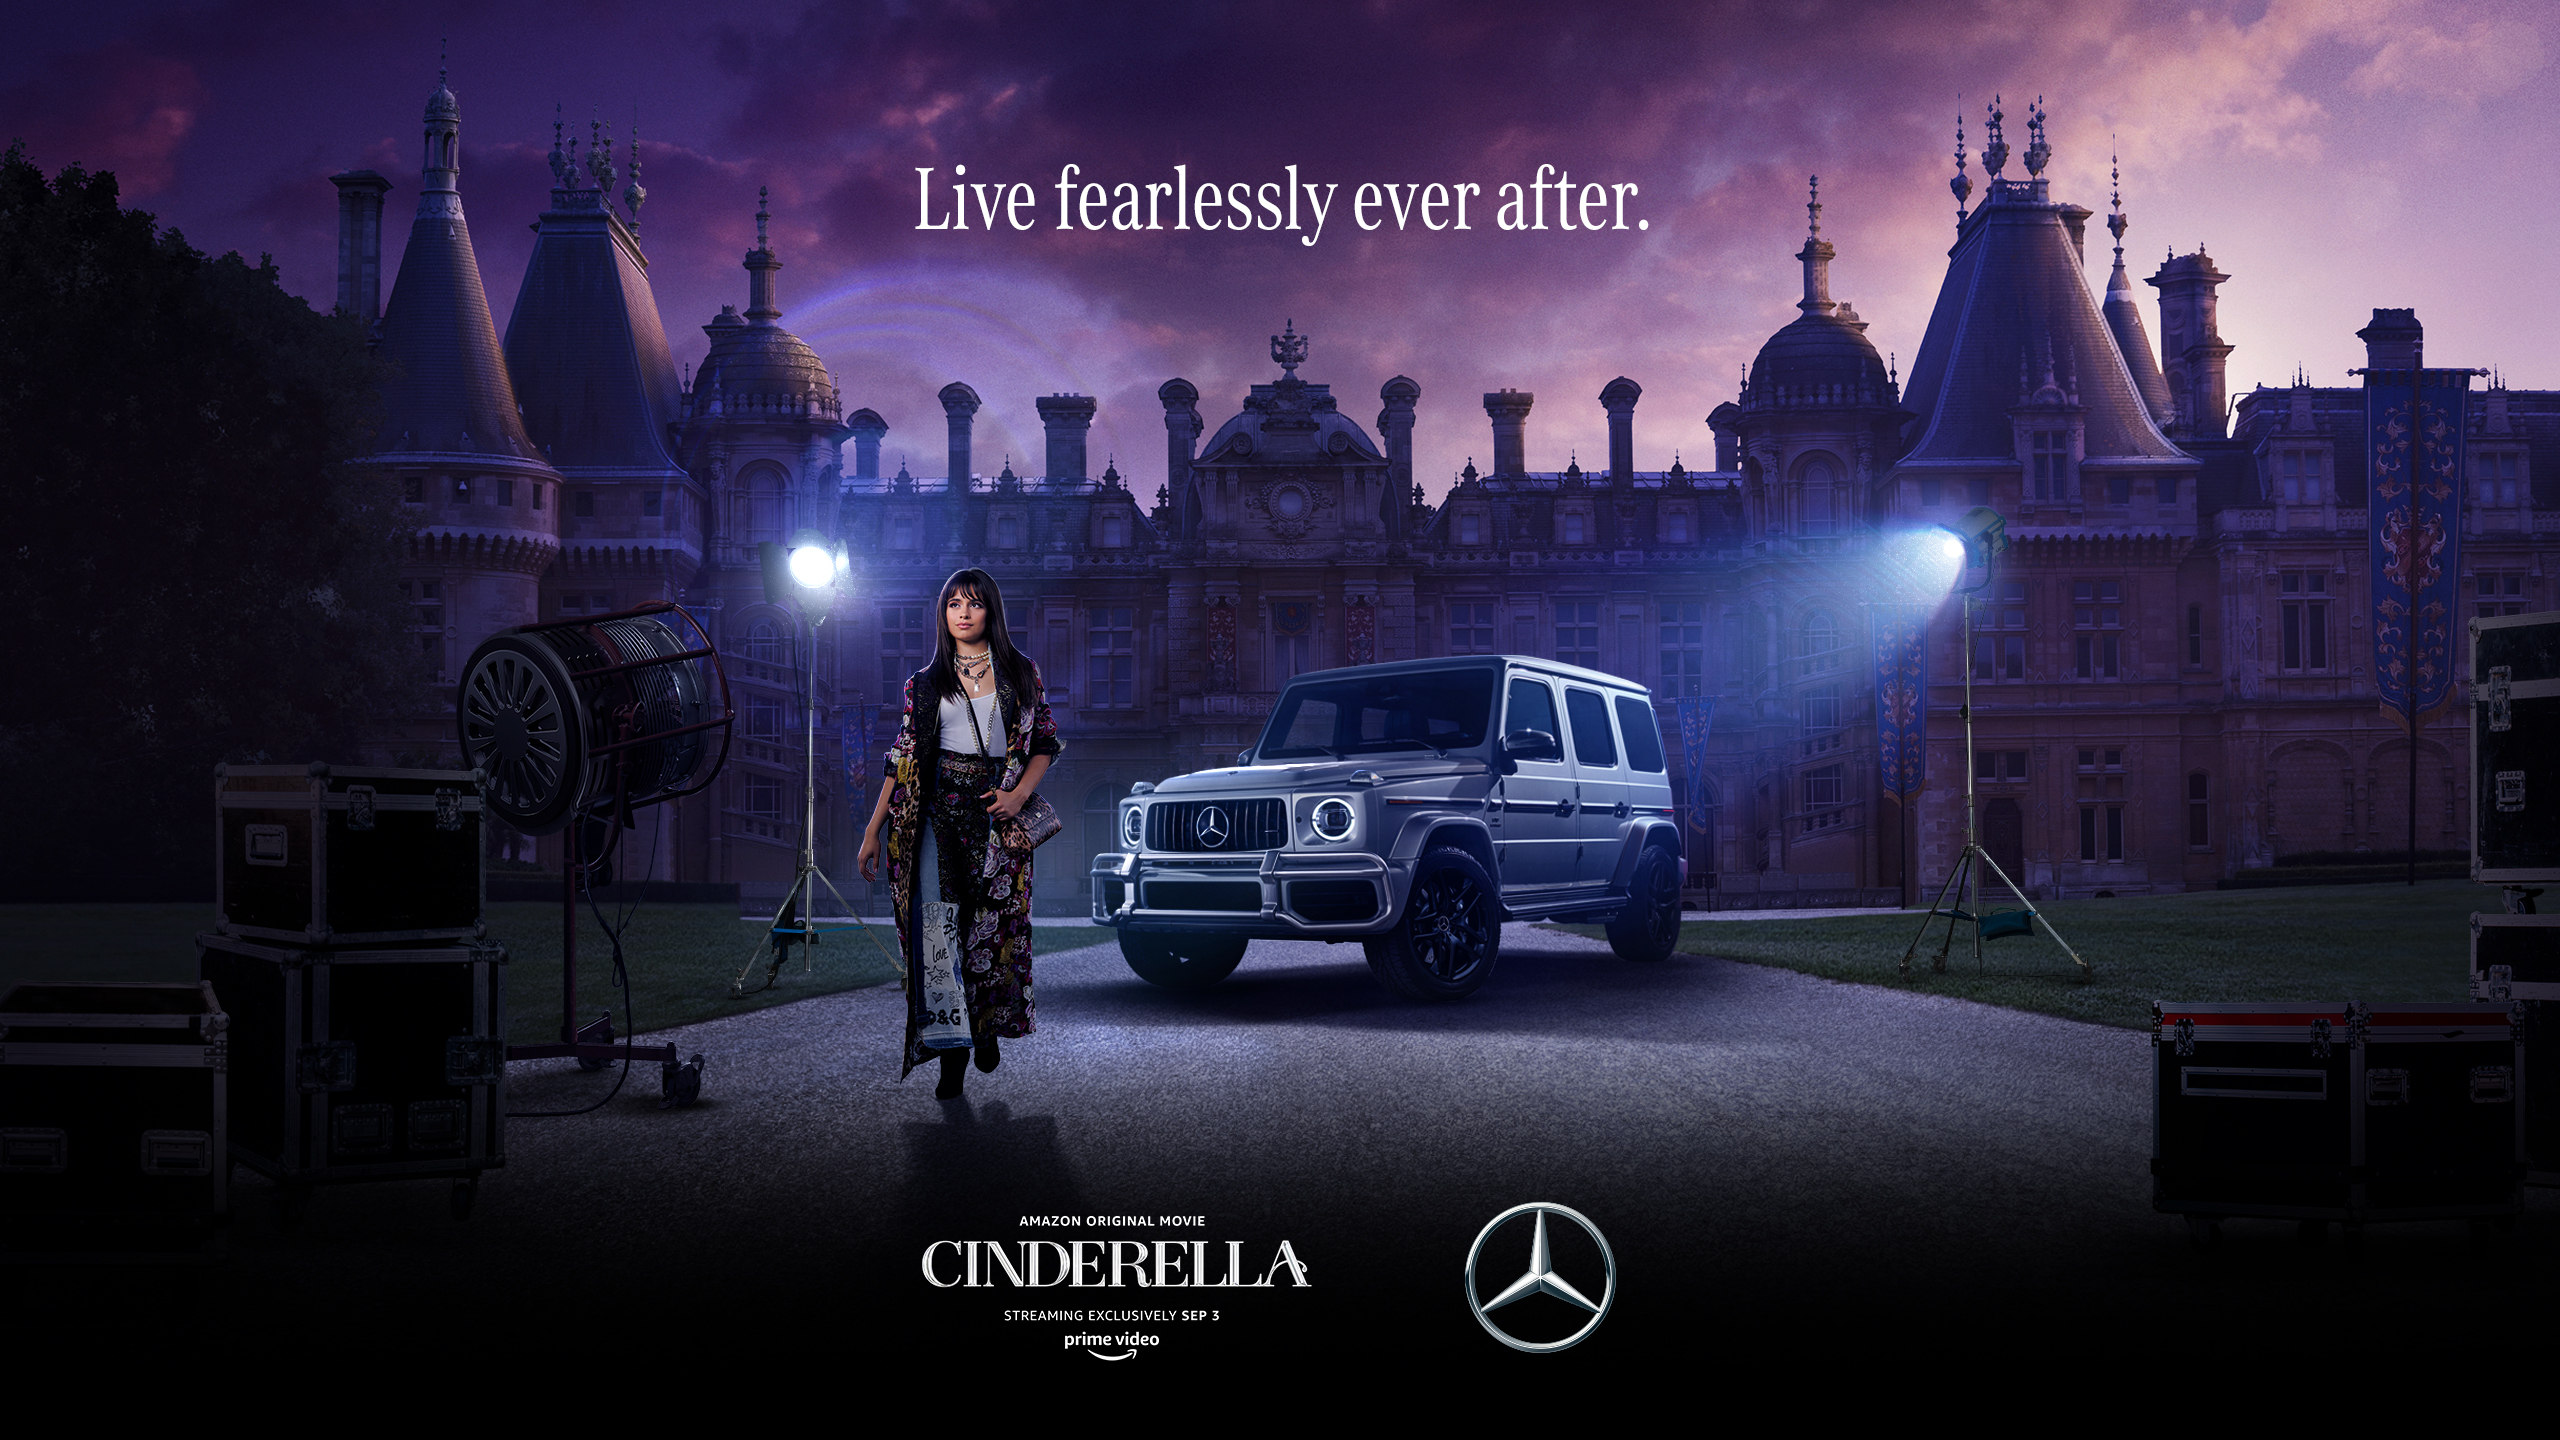 Mercedes Benz Joins With Amazon Prime Video On Cinderella Campaign To Celebrate And Inspire Individuals